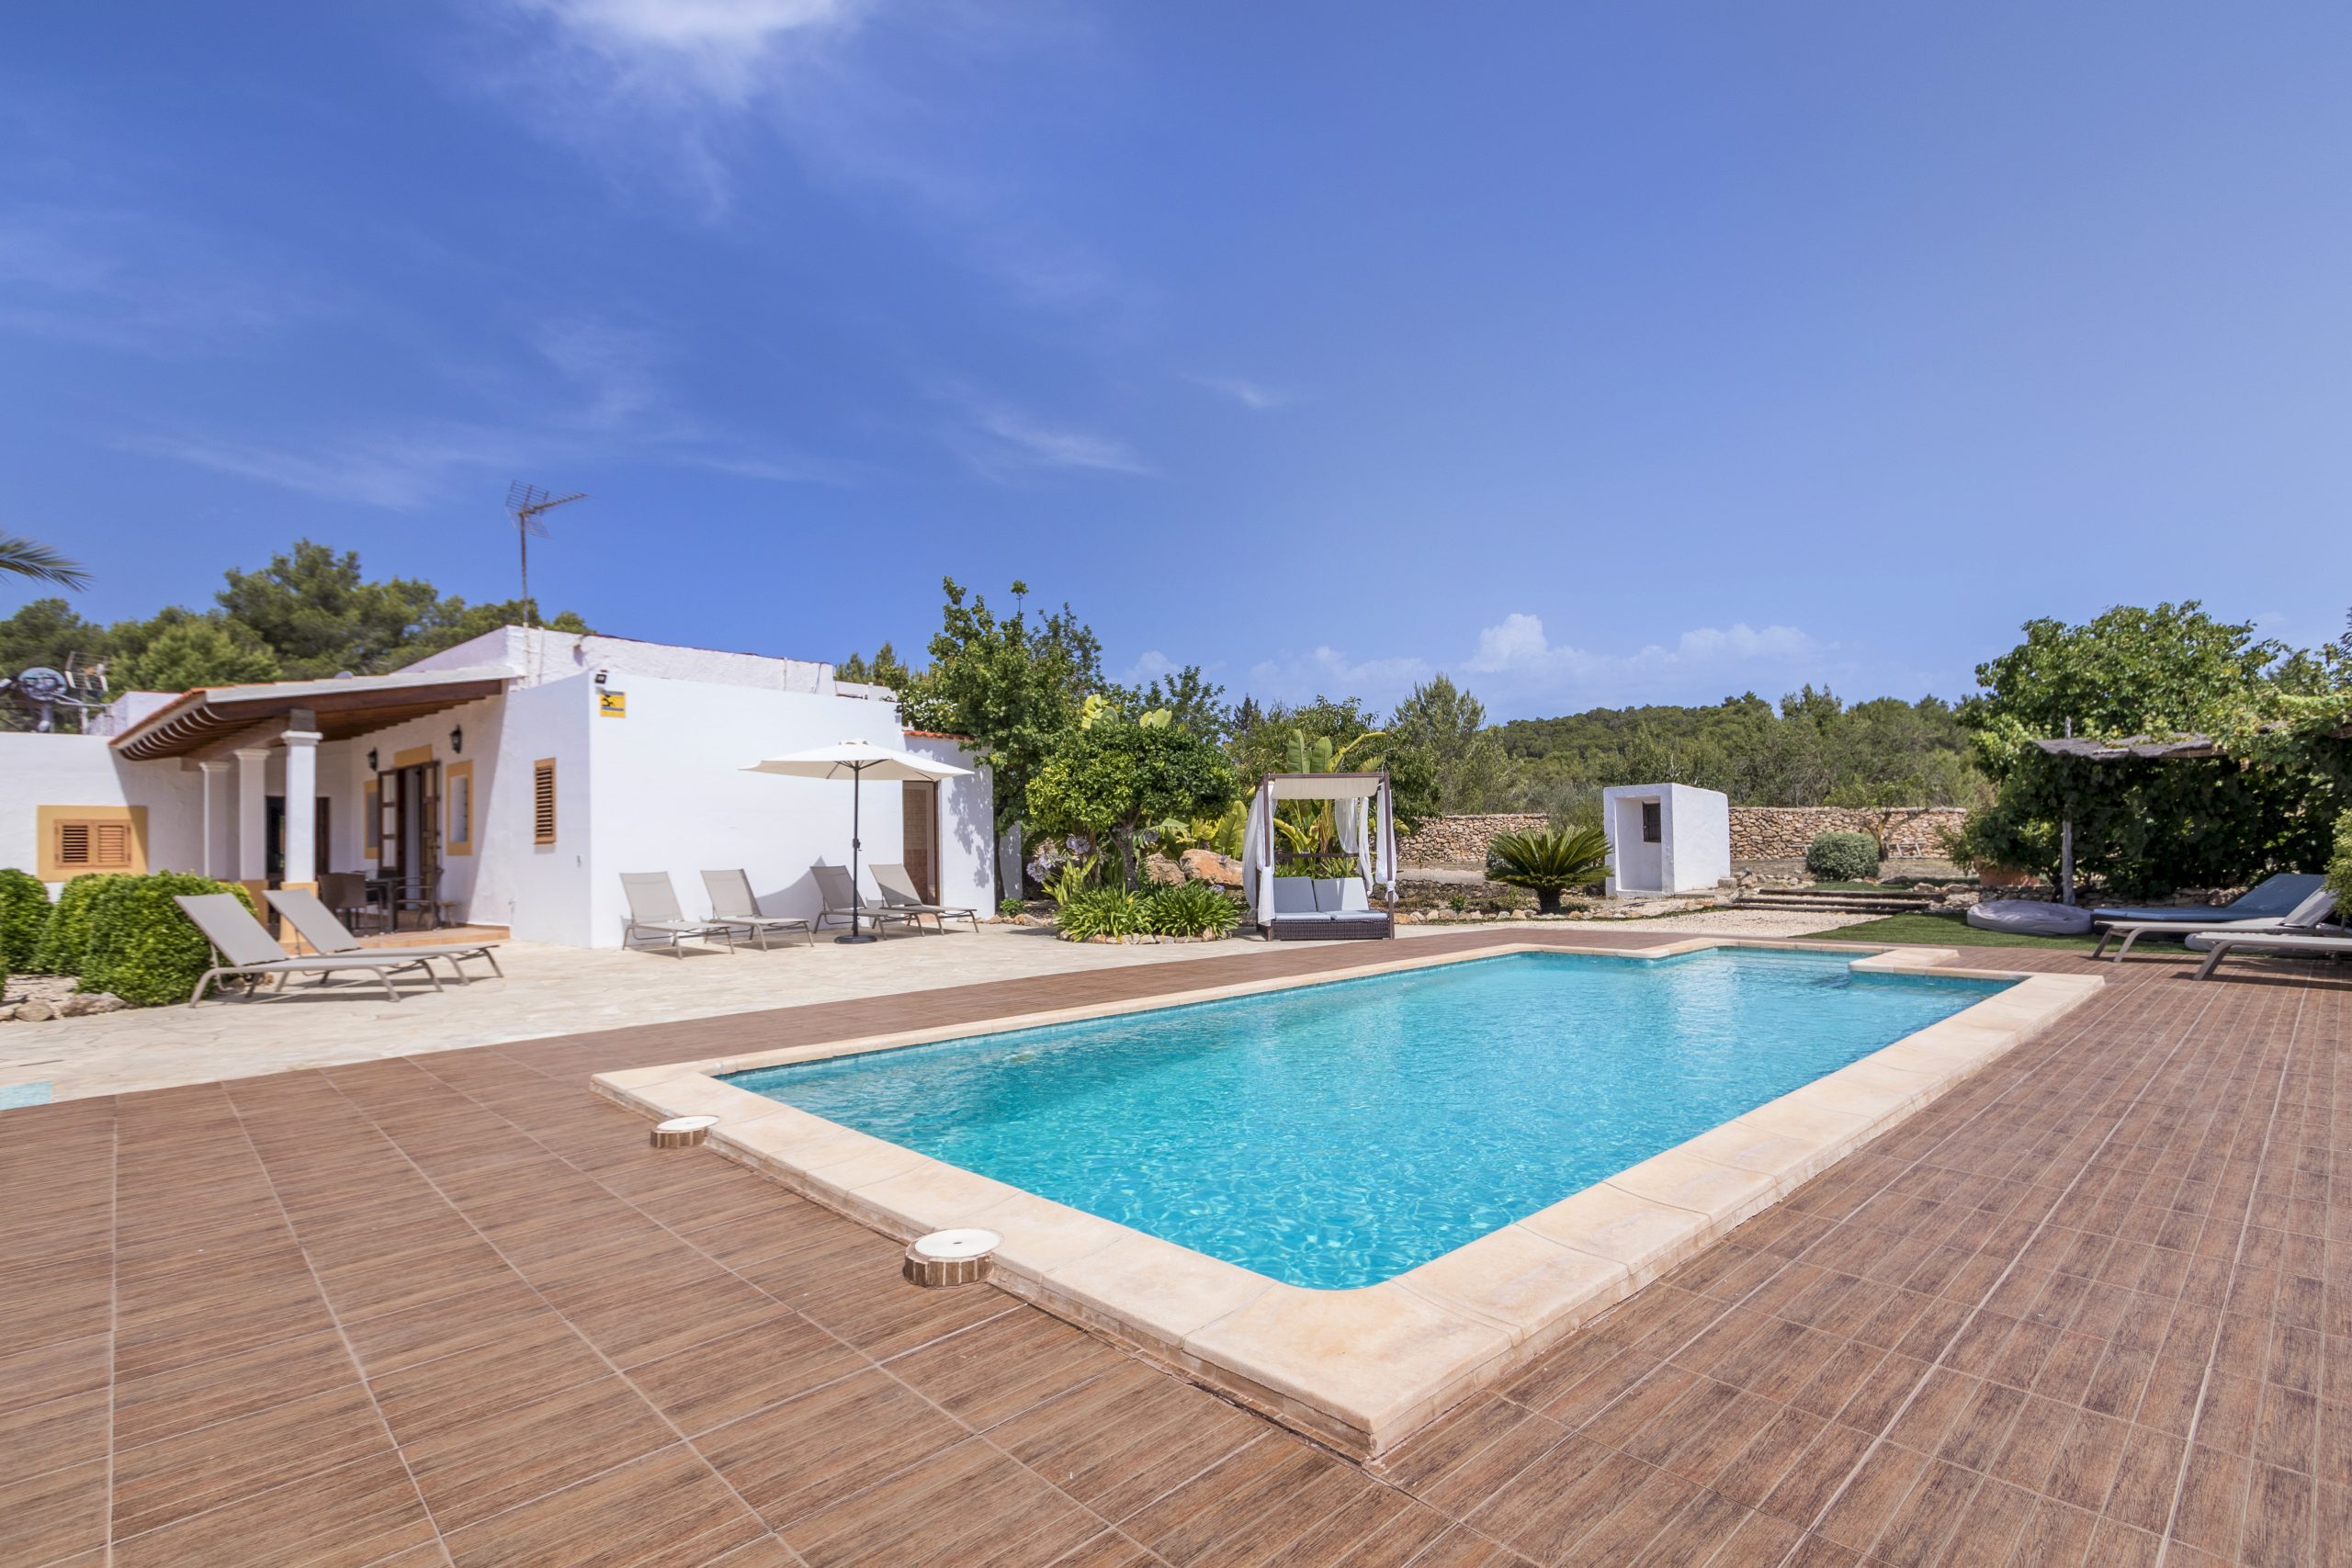 Traditional Ibizan finca in the heart of the island